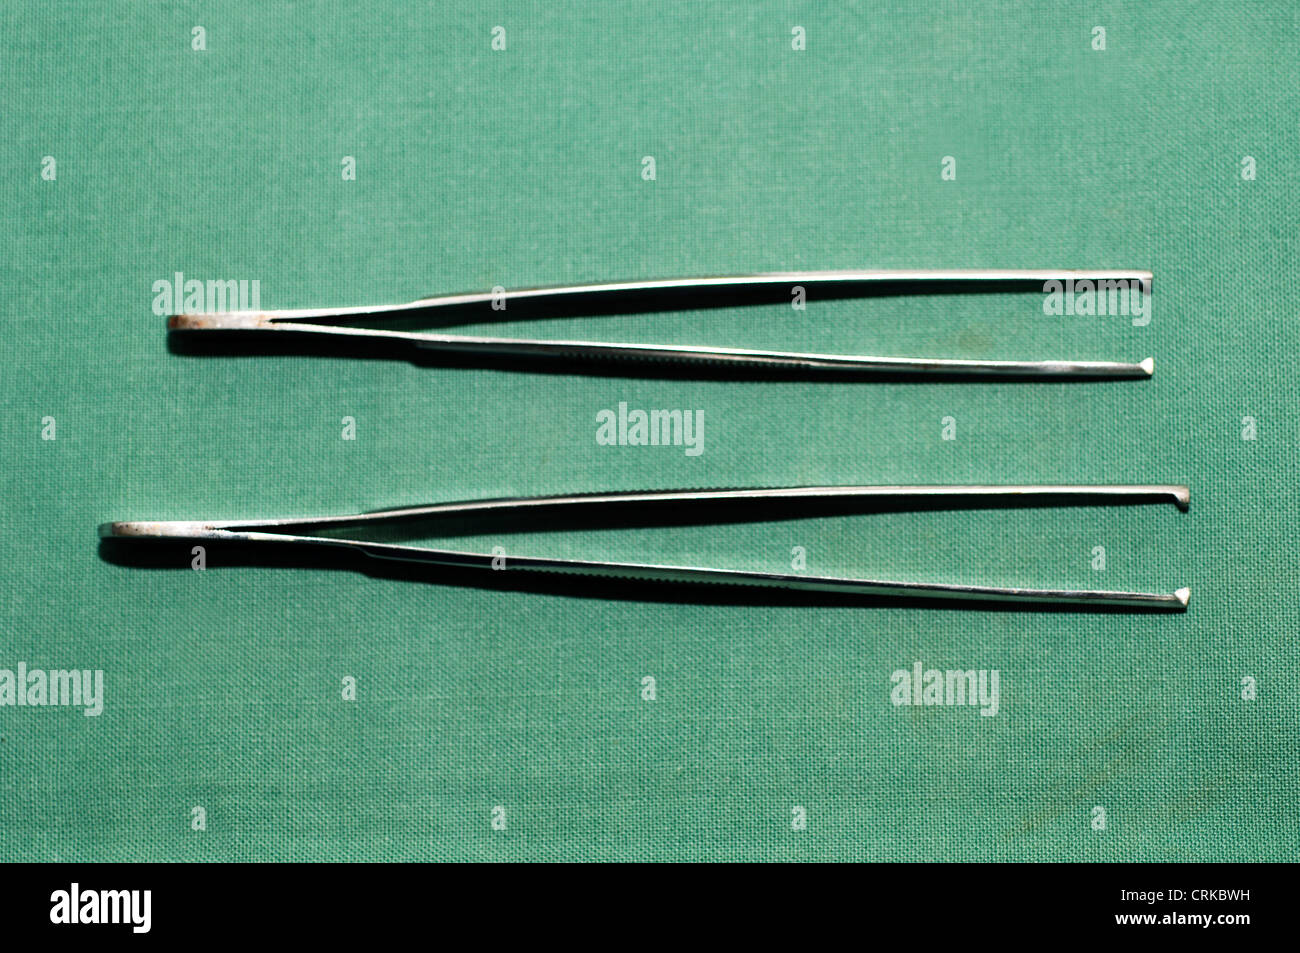 Strong toothed forceps are designed for grasping in an enclosed space, e.g. removing grass seeds from ear canals. Stock Photo